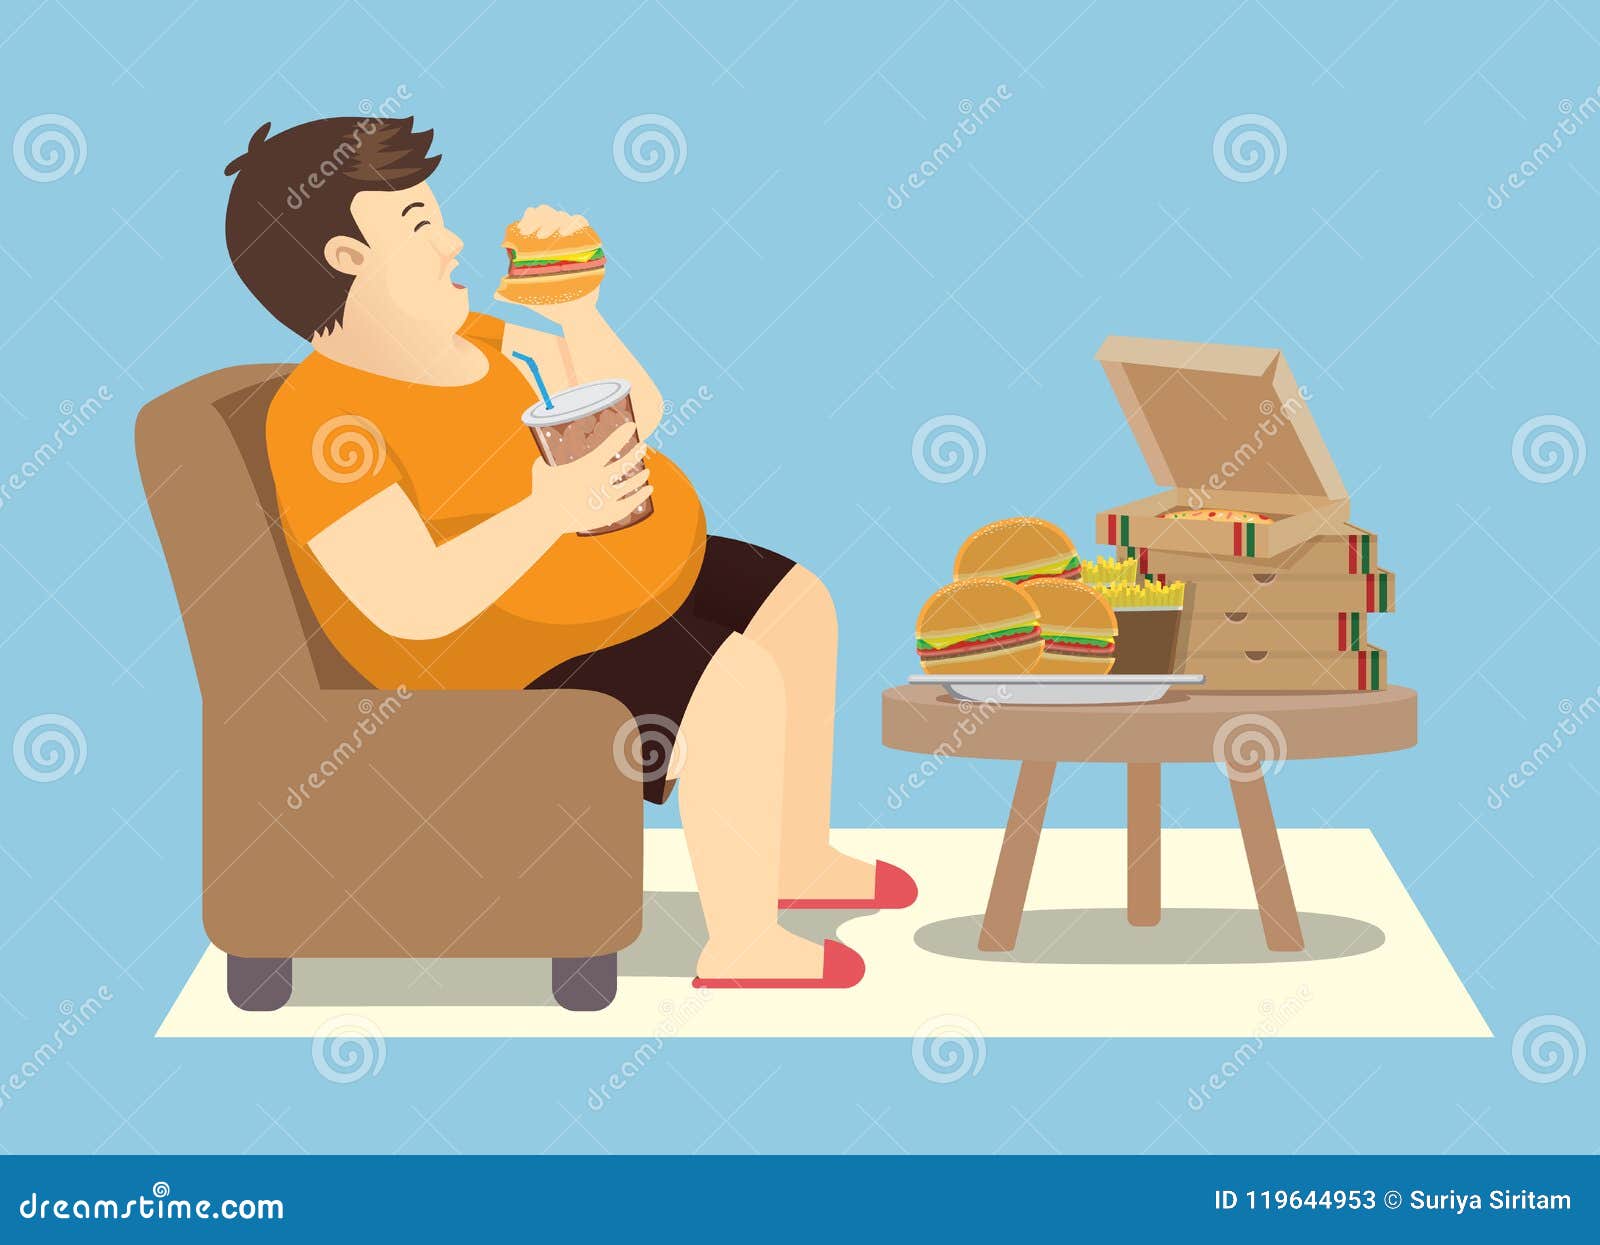 fat man overeating with many fast food on the table.